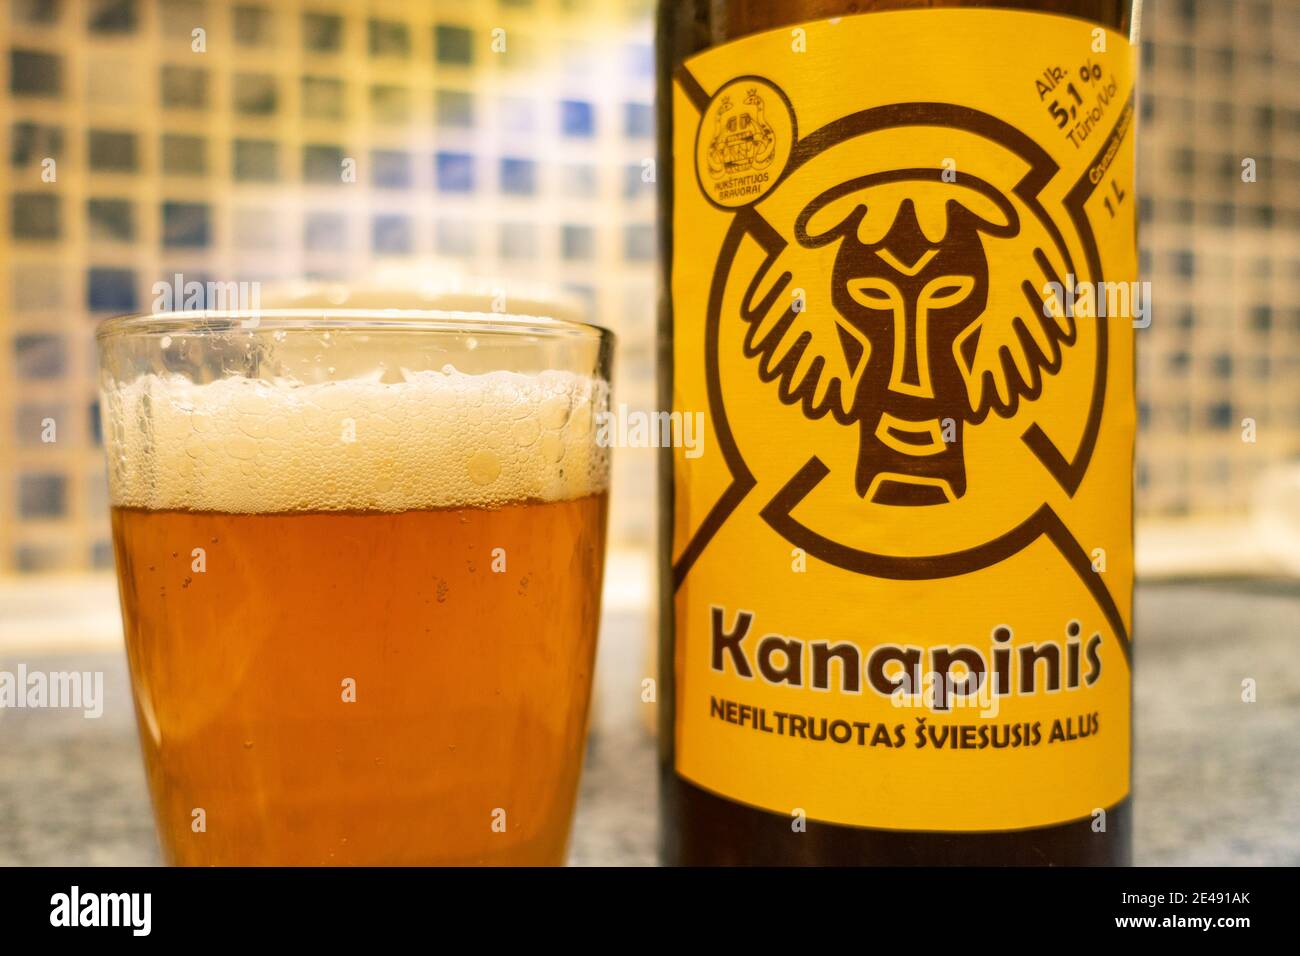 A bottle of Kanapinis, Eastern European beer, imported into the UK. Kanapinis is Lithuanian for 'of hemp', and the beers are both made with roasted he Stock Photo